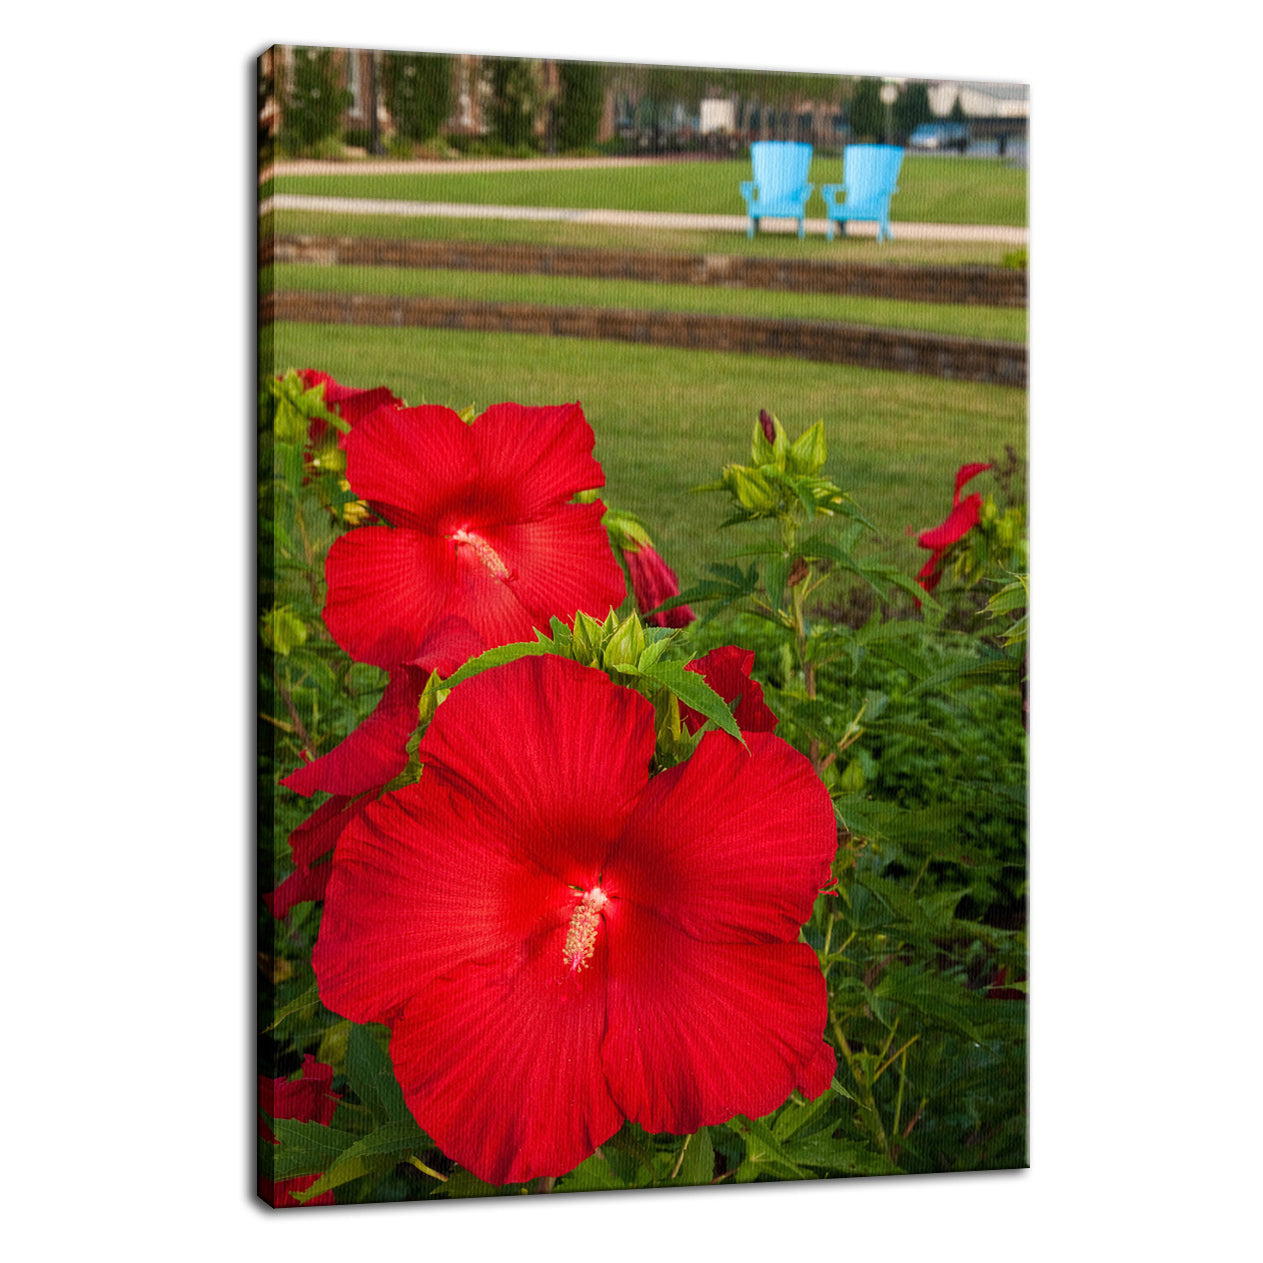 The Riverfront 2 Nature / Floral Photo Fine Art Canvas Wall Art Prints  - PIPAFINEART